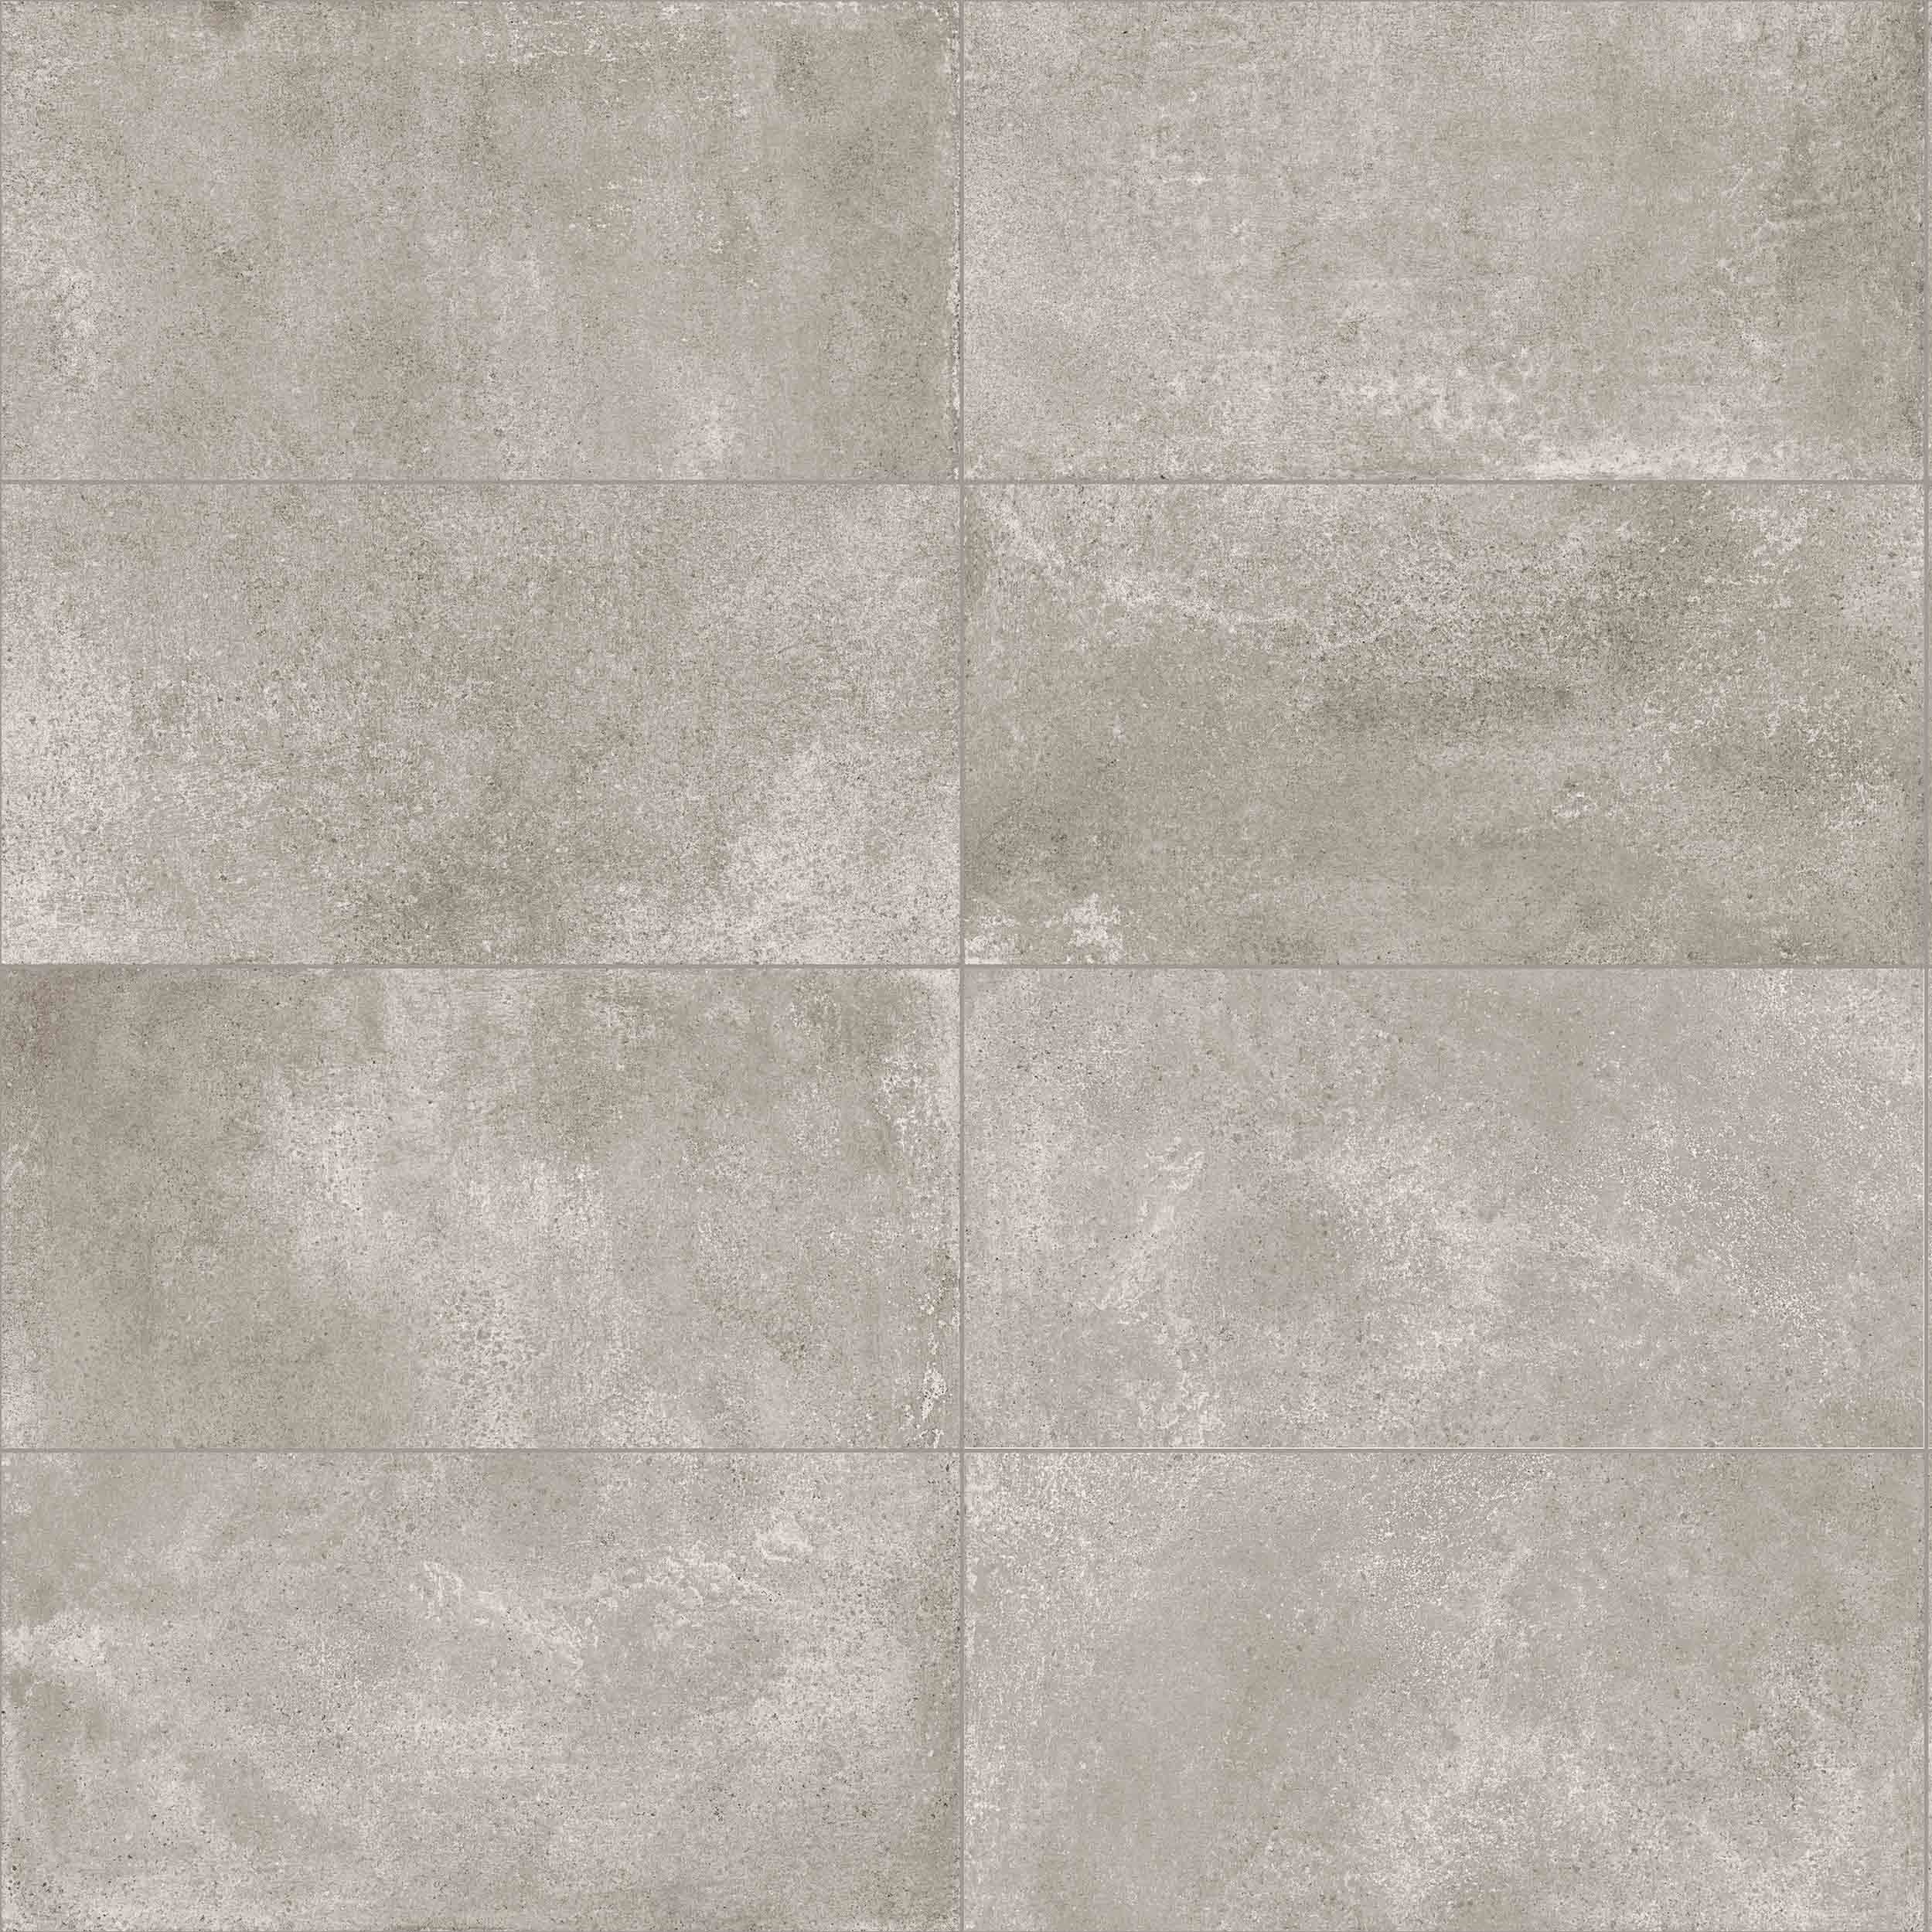 surface group international landmark made in stone vision grey grip field tile 12x24x9 mm for outdoor application manufactured by landmark